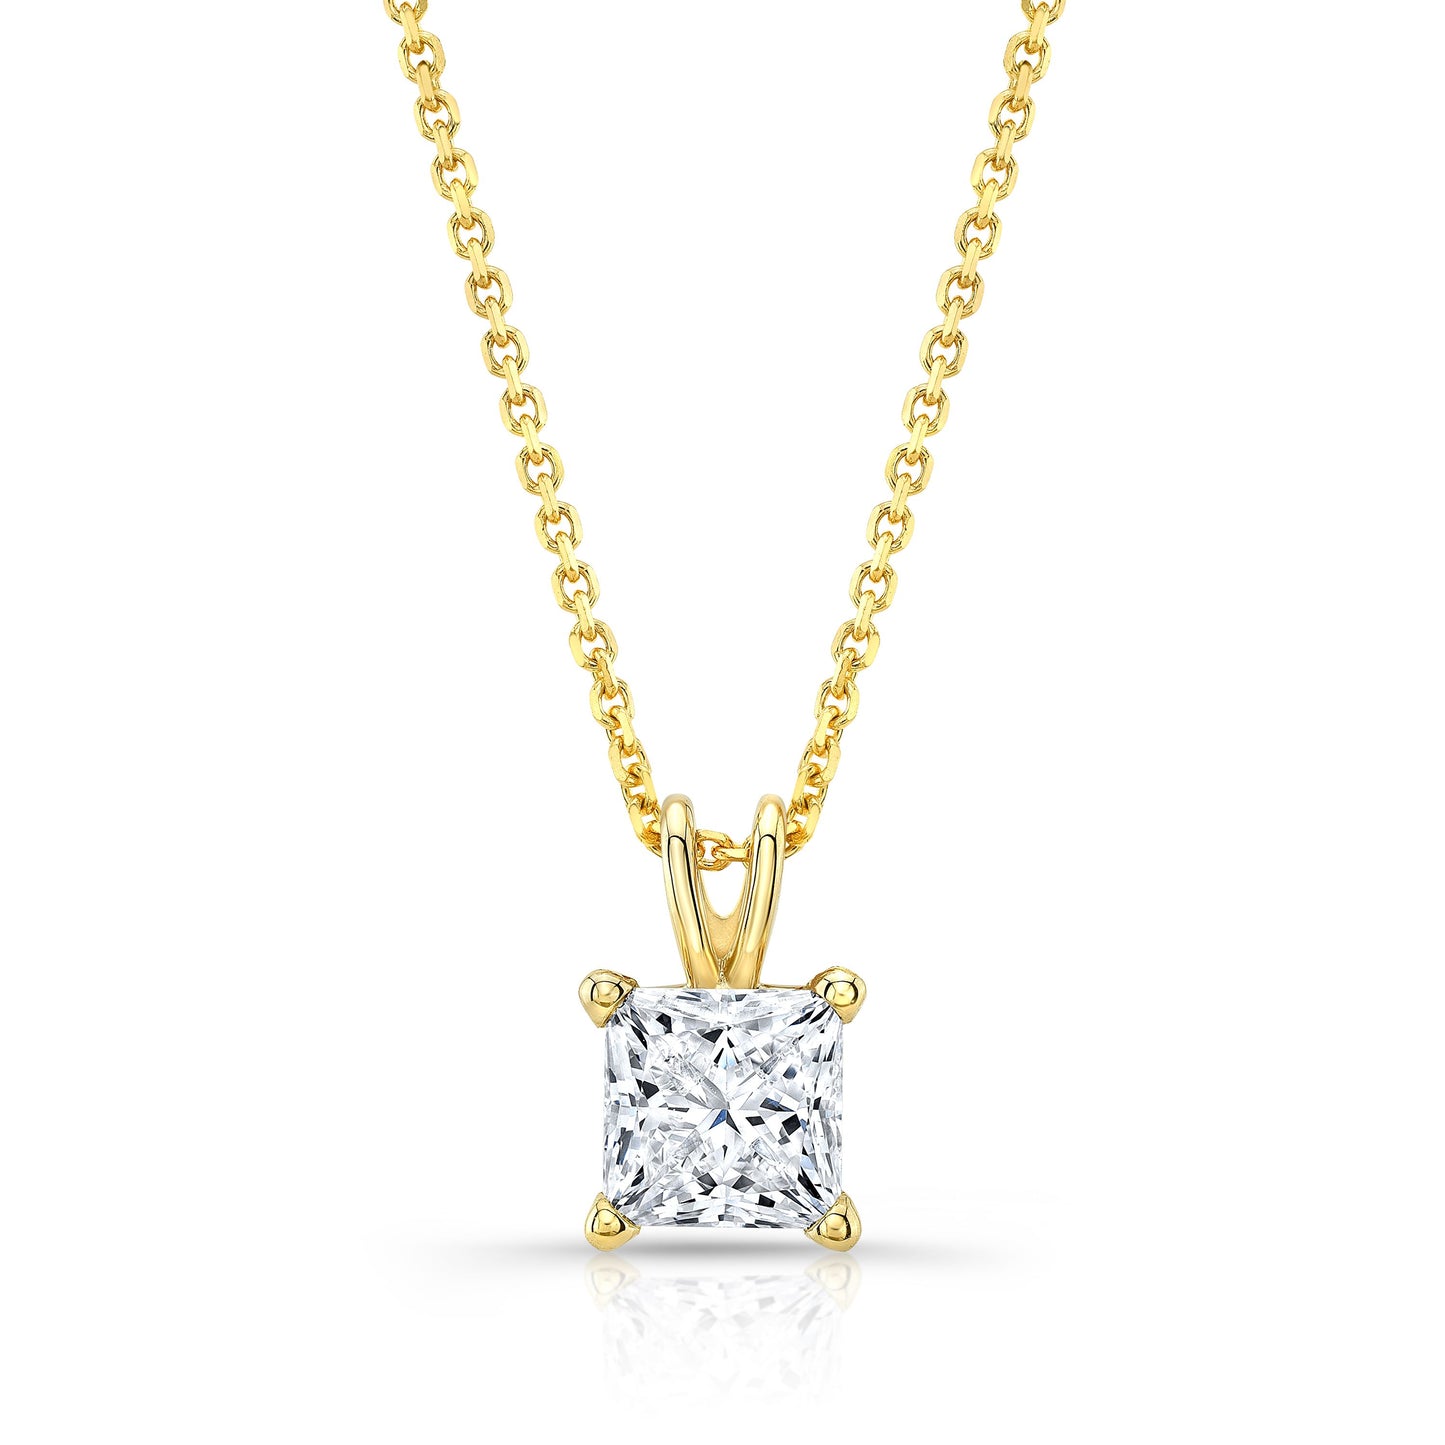 Princess Diamond Solitaire Pendant In A 14k Yellow Gold 4-prong Basket Setting, 3ct. T.w. (hi, Si1-si2)